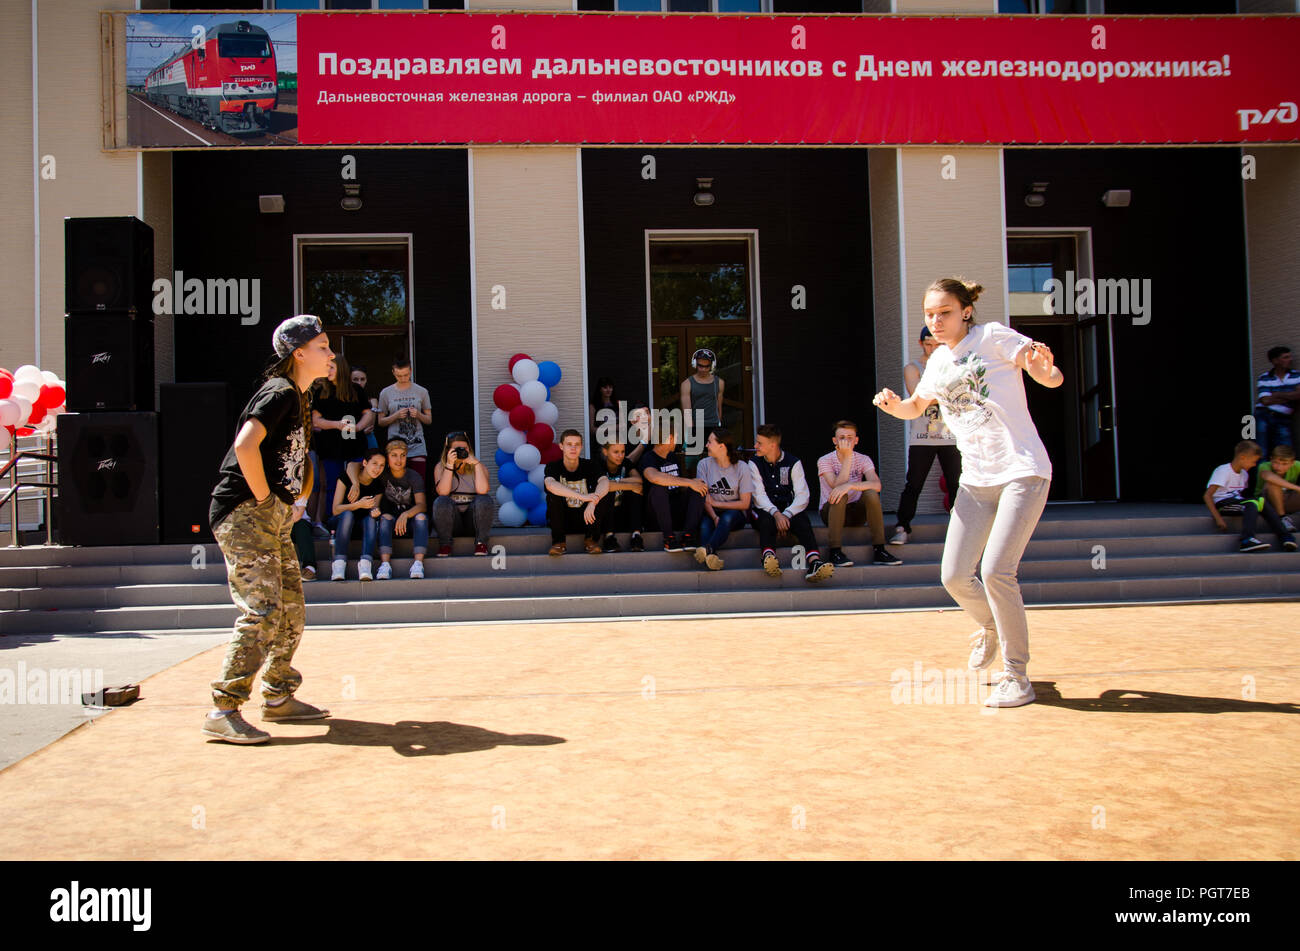 Komsomolsk-on-Amur, Russia, 1 August, 2015. two girsl dances breakdance in the square with spectators Stock Photo